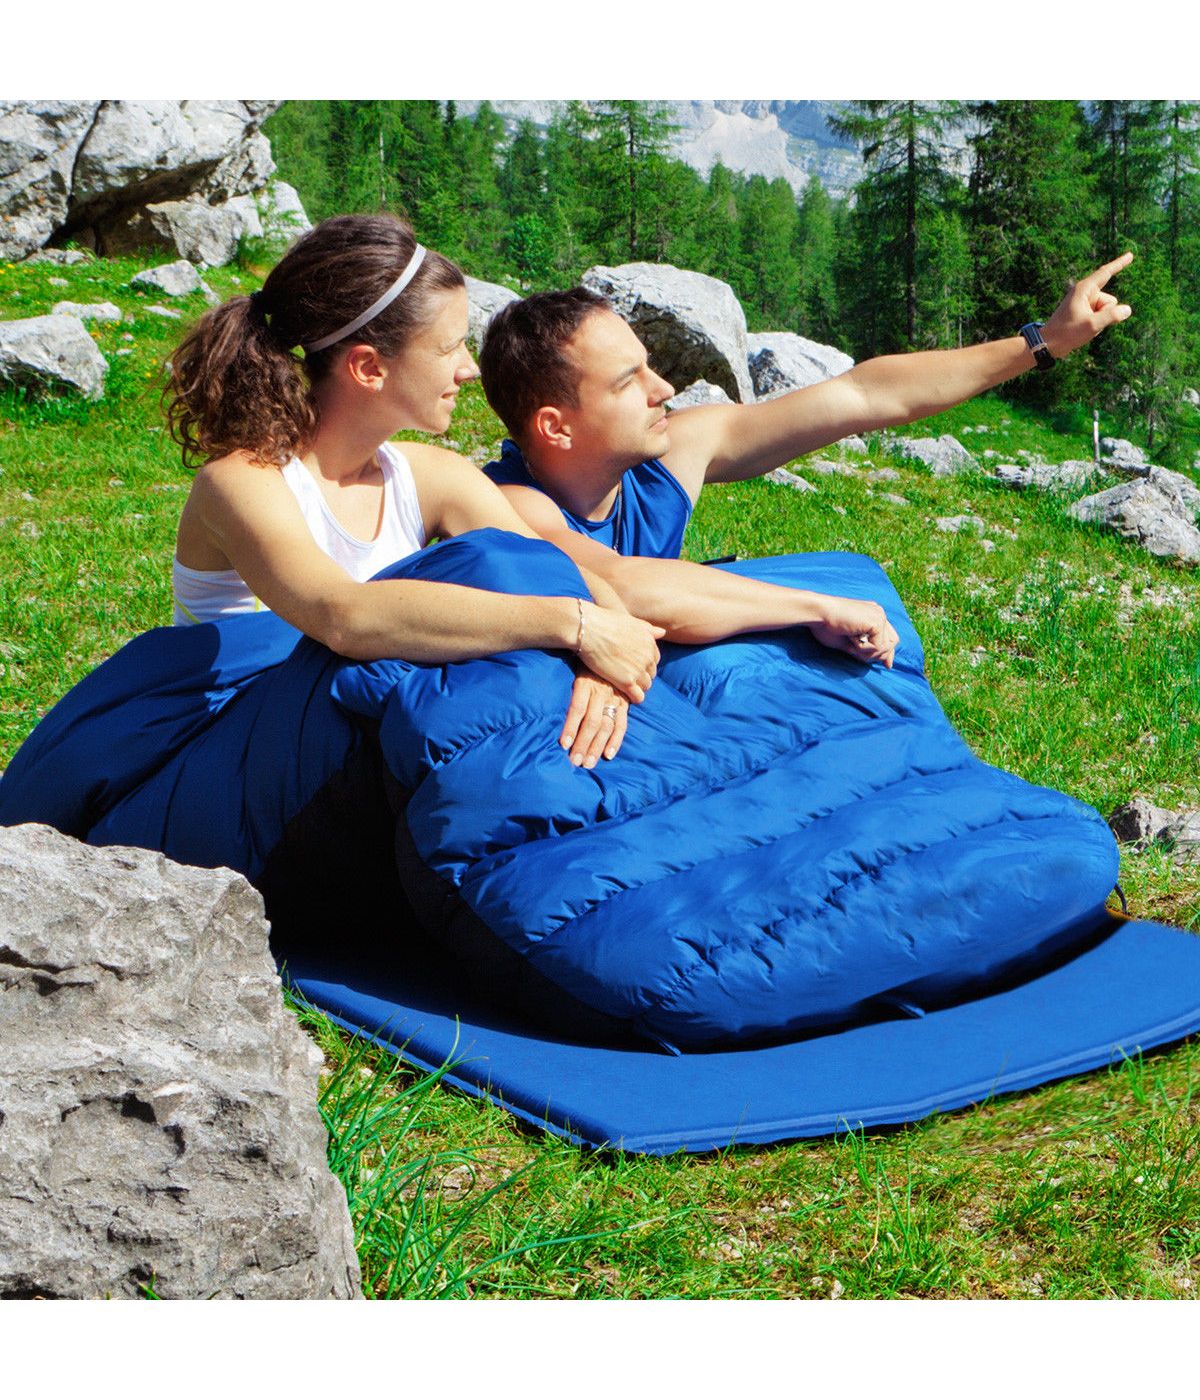 Double Sleeping Bag With 2 Pillows For Camping - Queen Size XL (2 Person) Blue